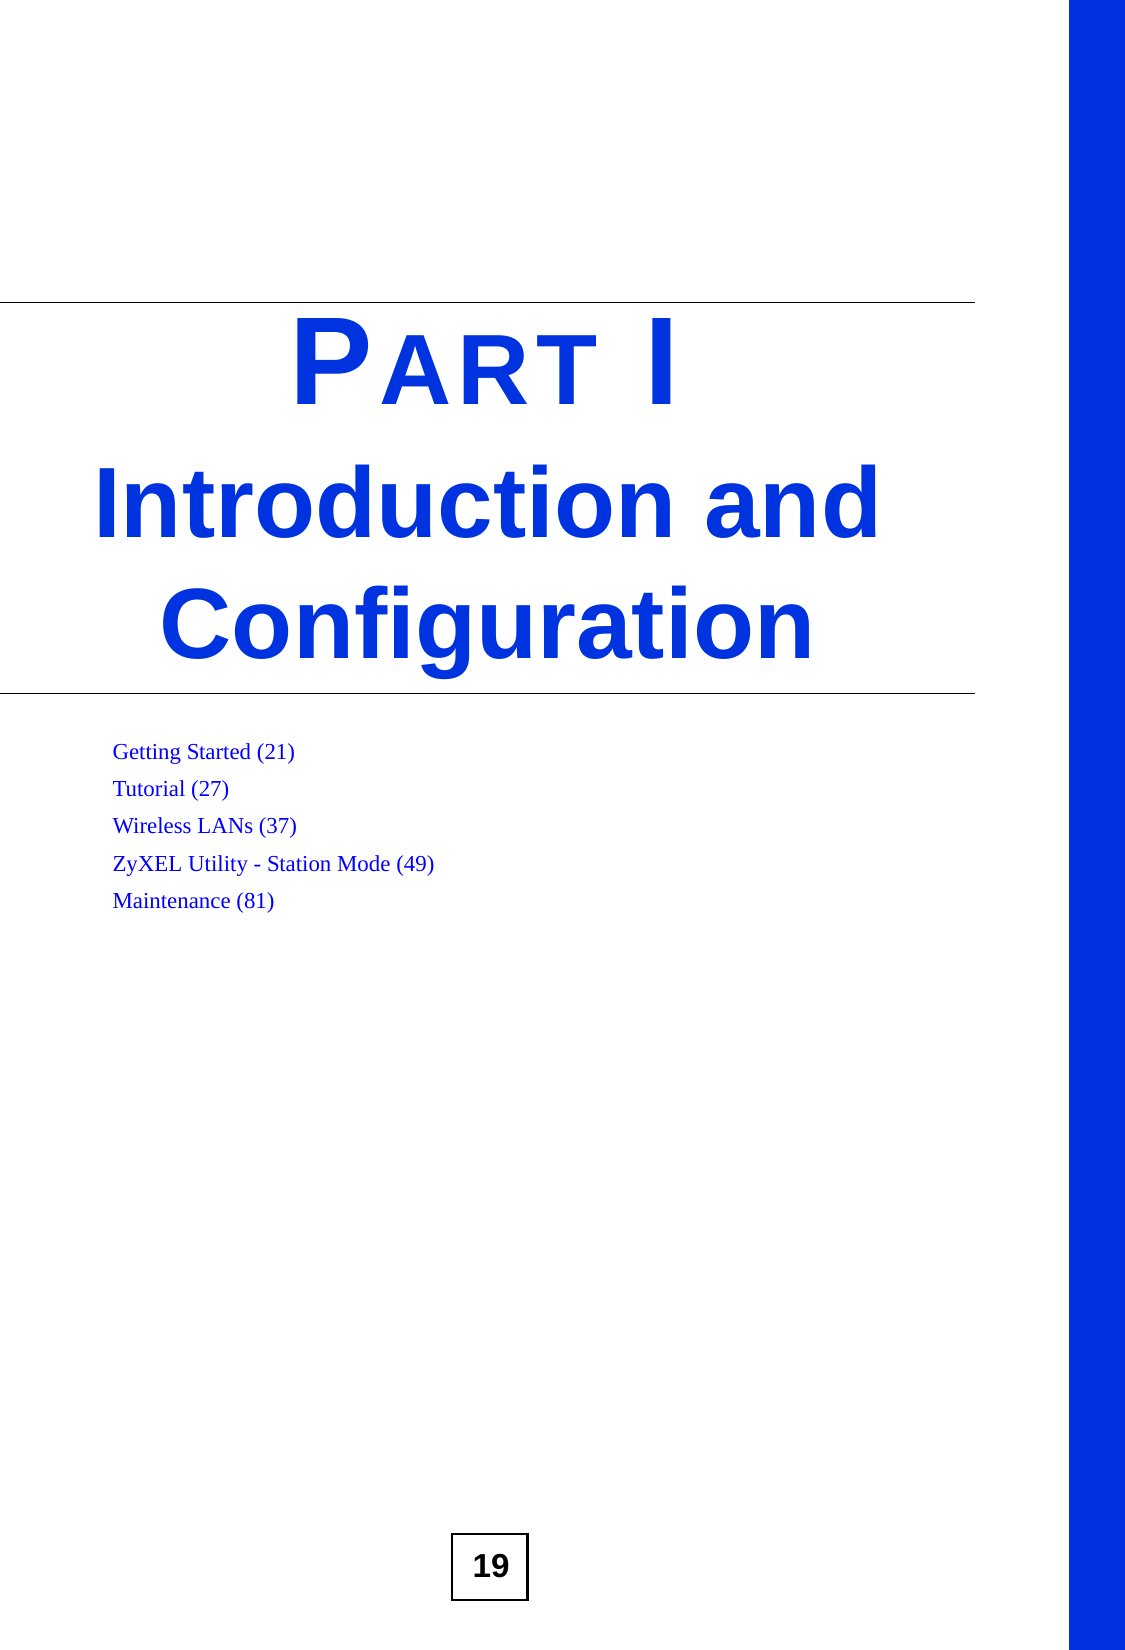 19PART IIntroduction and ConfigurationGetting Started (21)Tutorial (27)Wireless LANs (37)ZyXEL Utility - Station Mode (49)Maintenance (81)